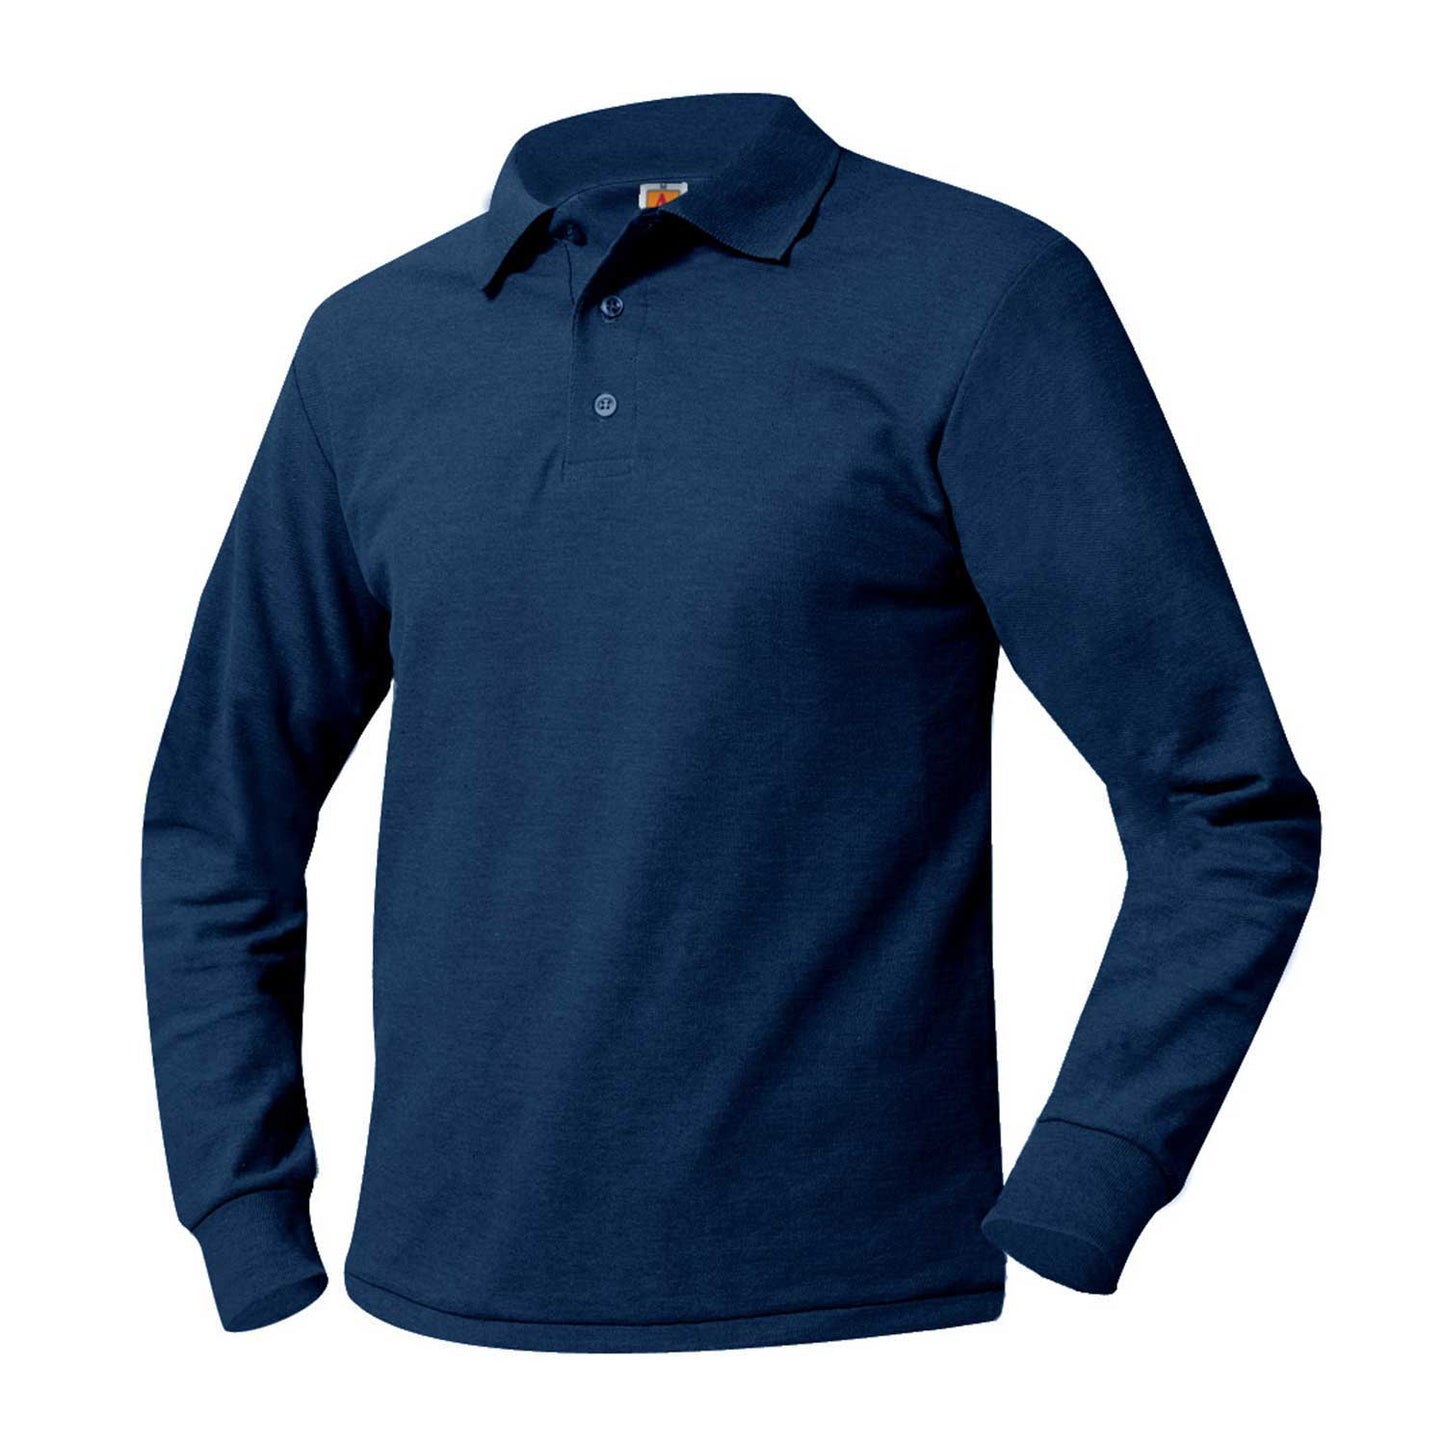 Men's/Unisex Pique Polo Shirt, Long Sleeves, Ribbed Cuffs - 1206